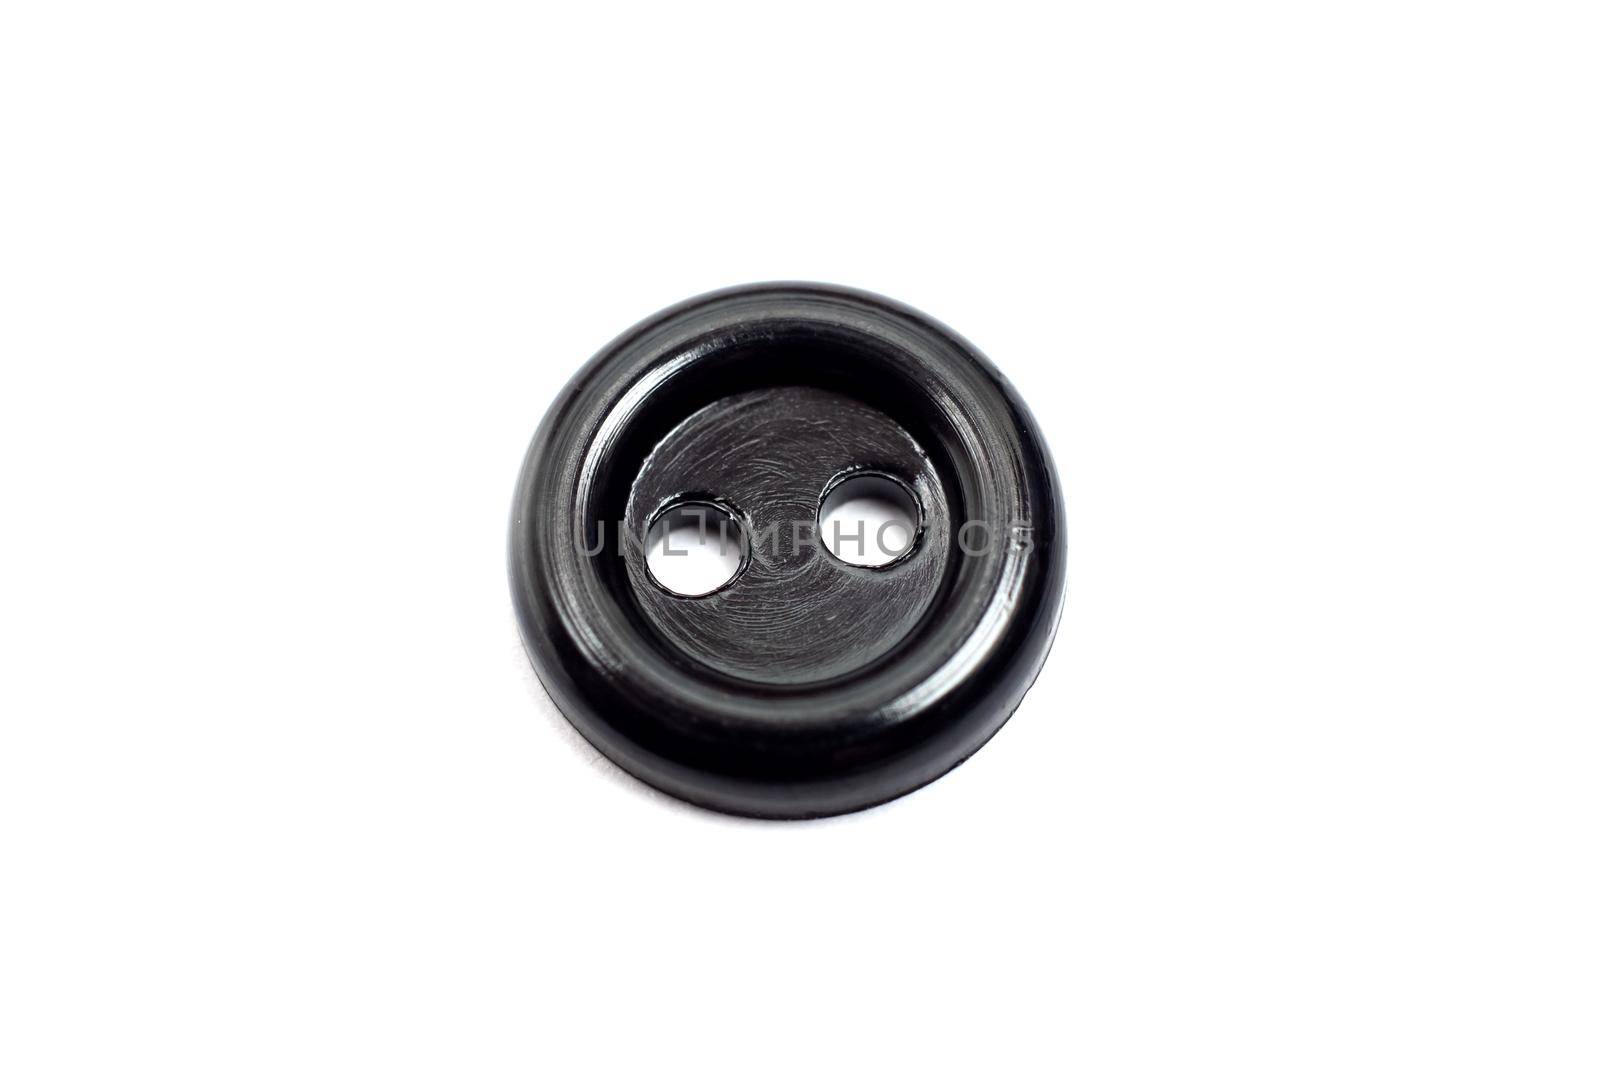 One black plastic button, isolate on white background by Vera1703